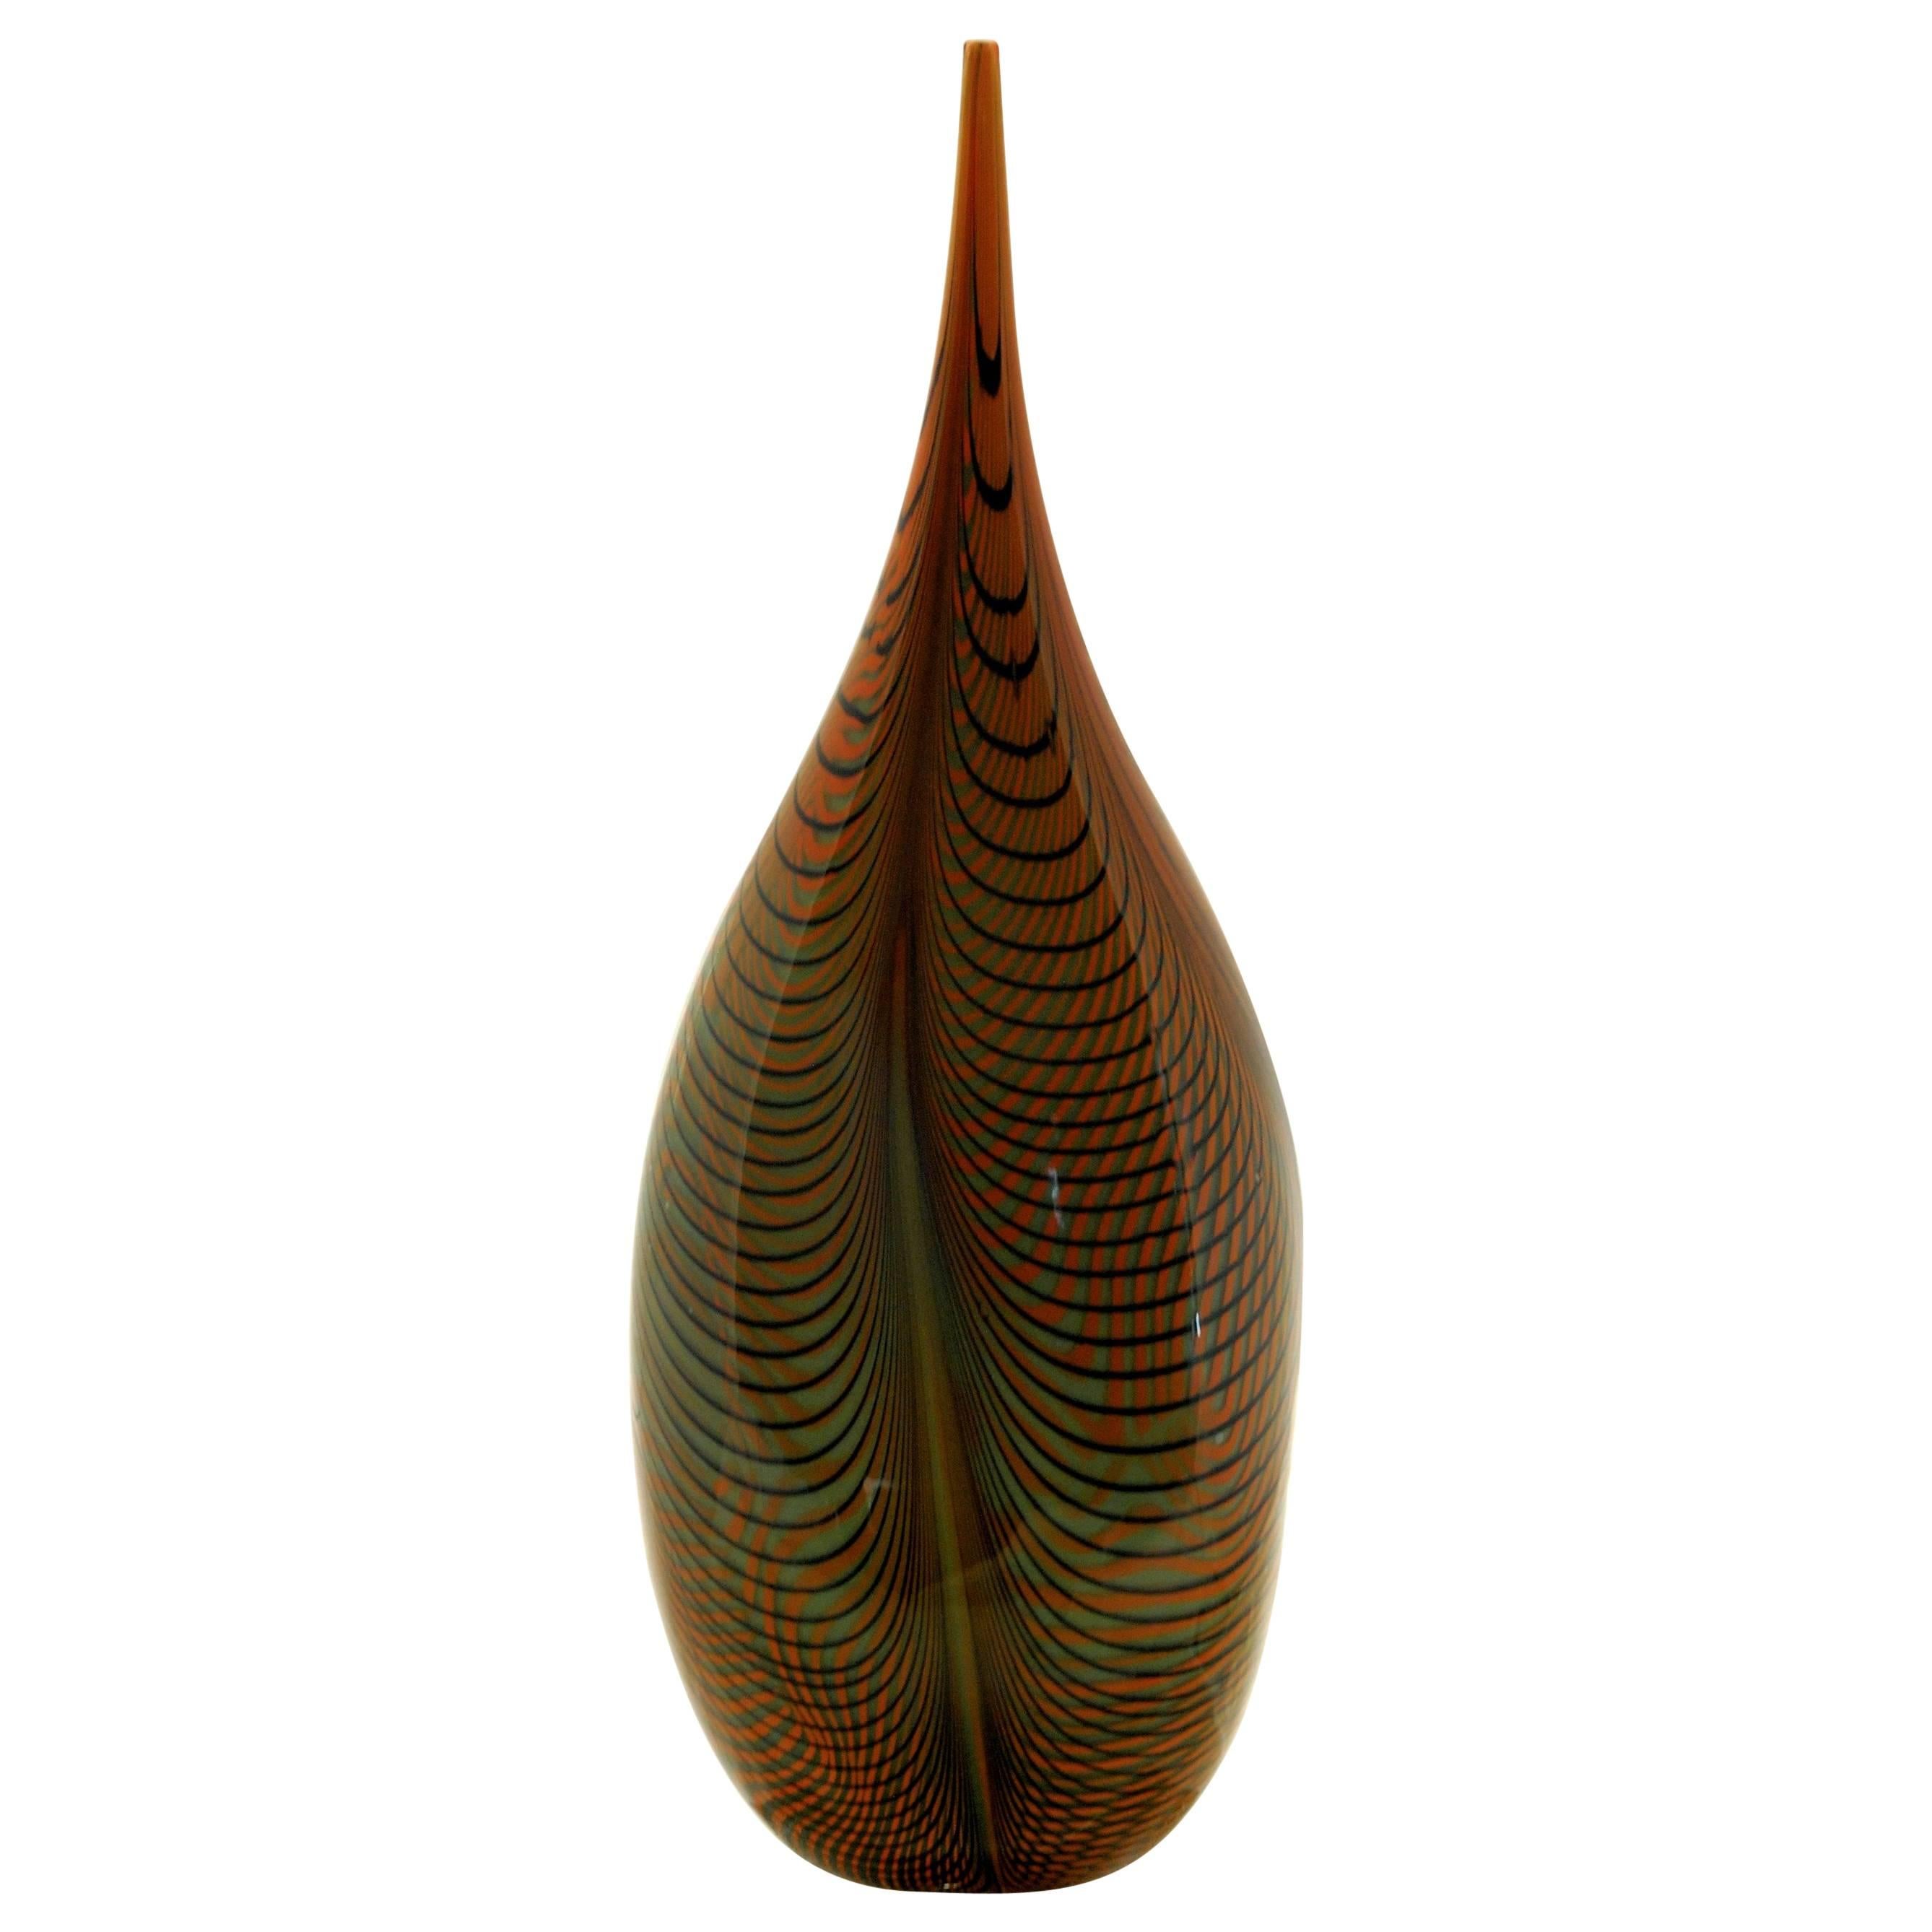 Alberto Donà, Tall Feather Vase, Black Green Filigree over Terracotta Background For Sale